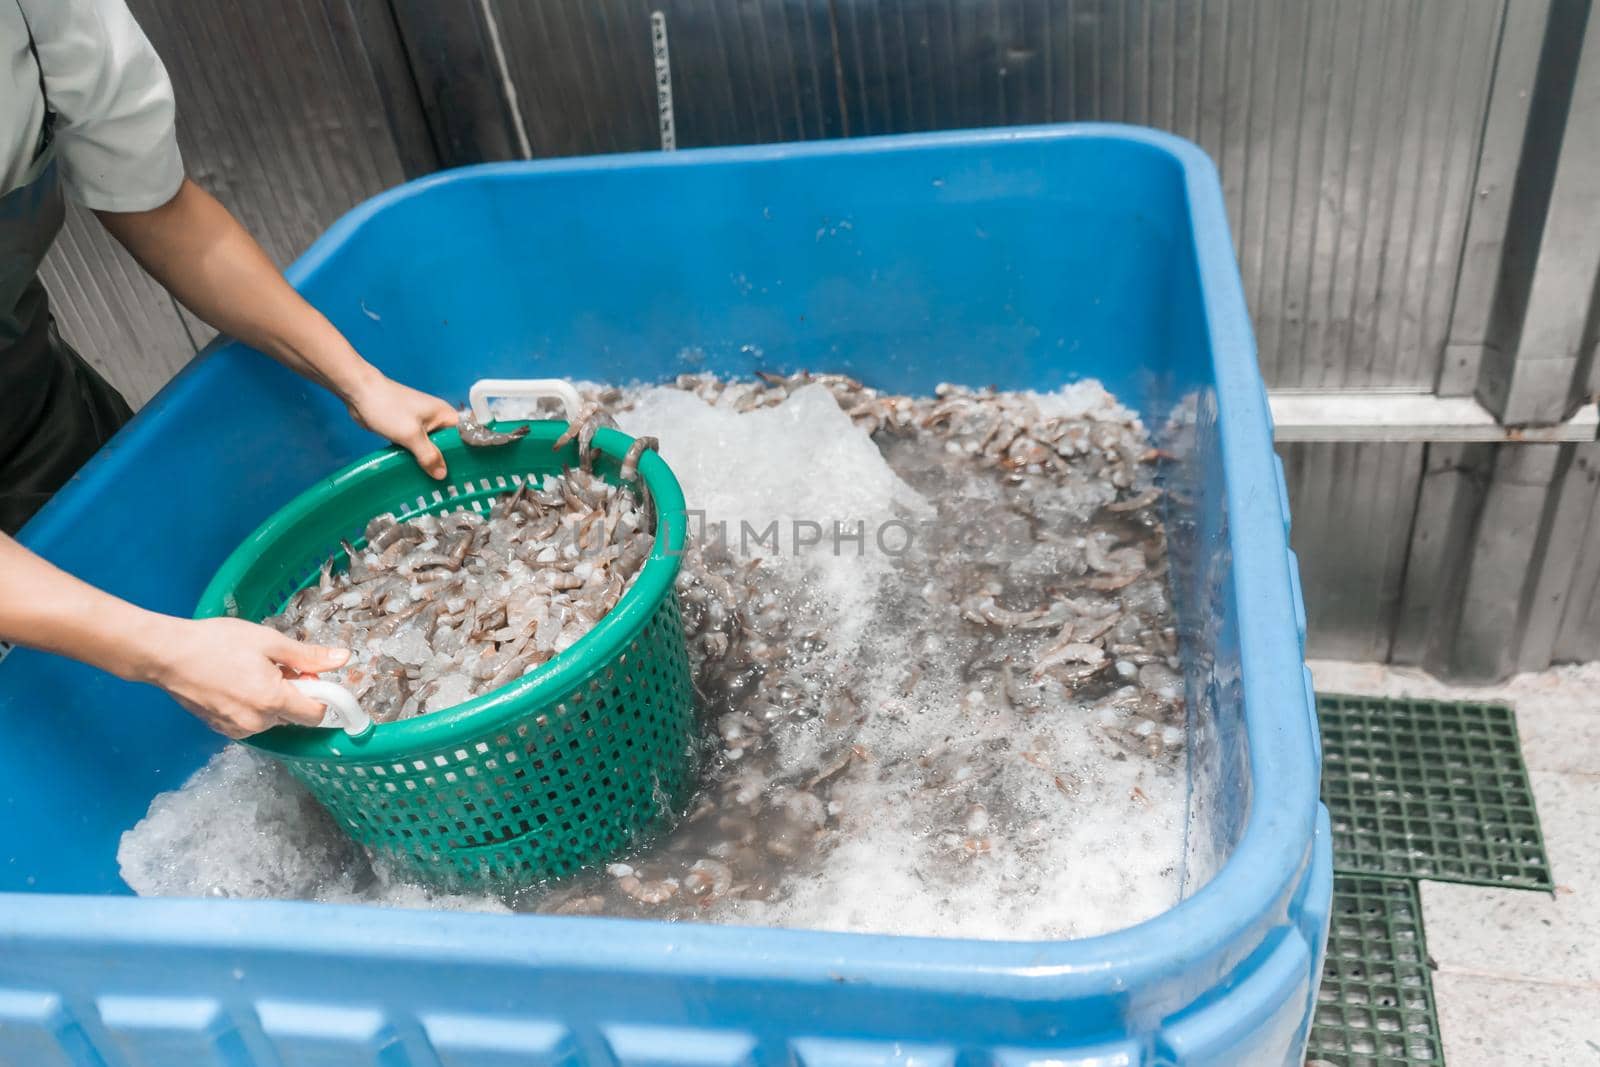 Latino Industrial Plant Operator Collecting Frozen Shrimp in a Metal Container by cfalvarez